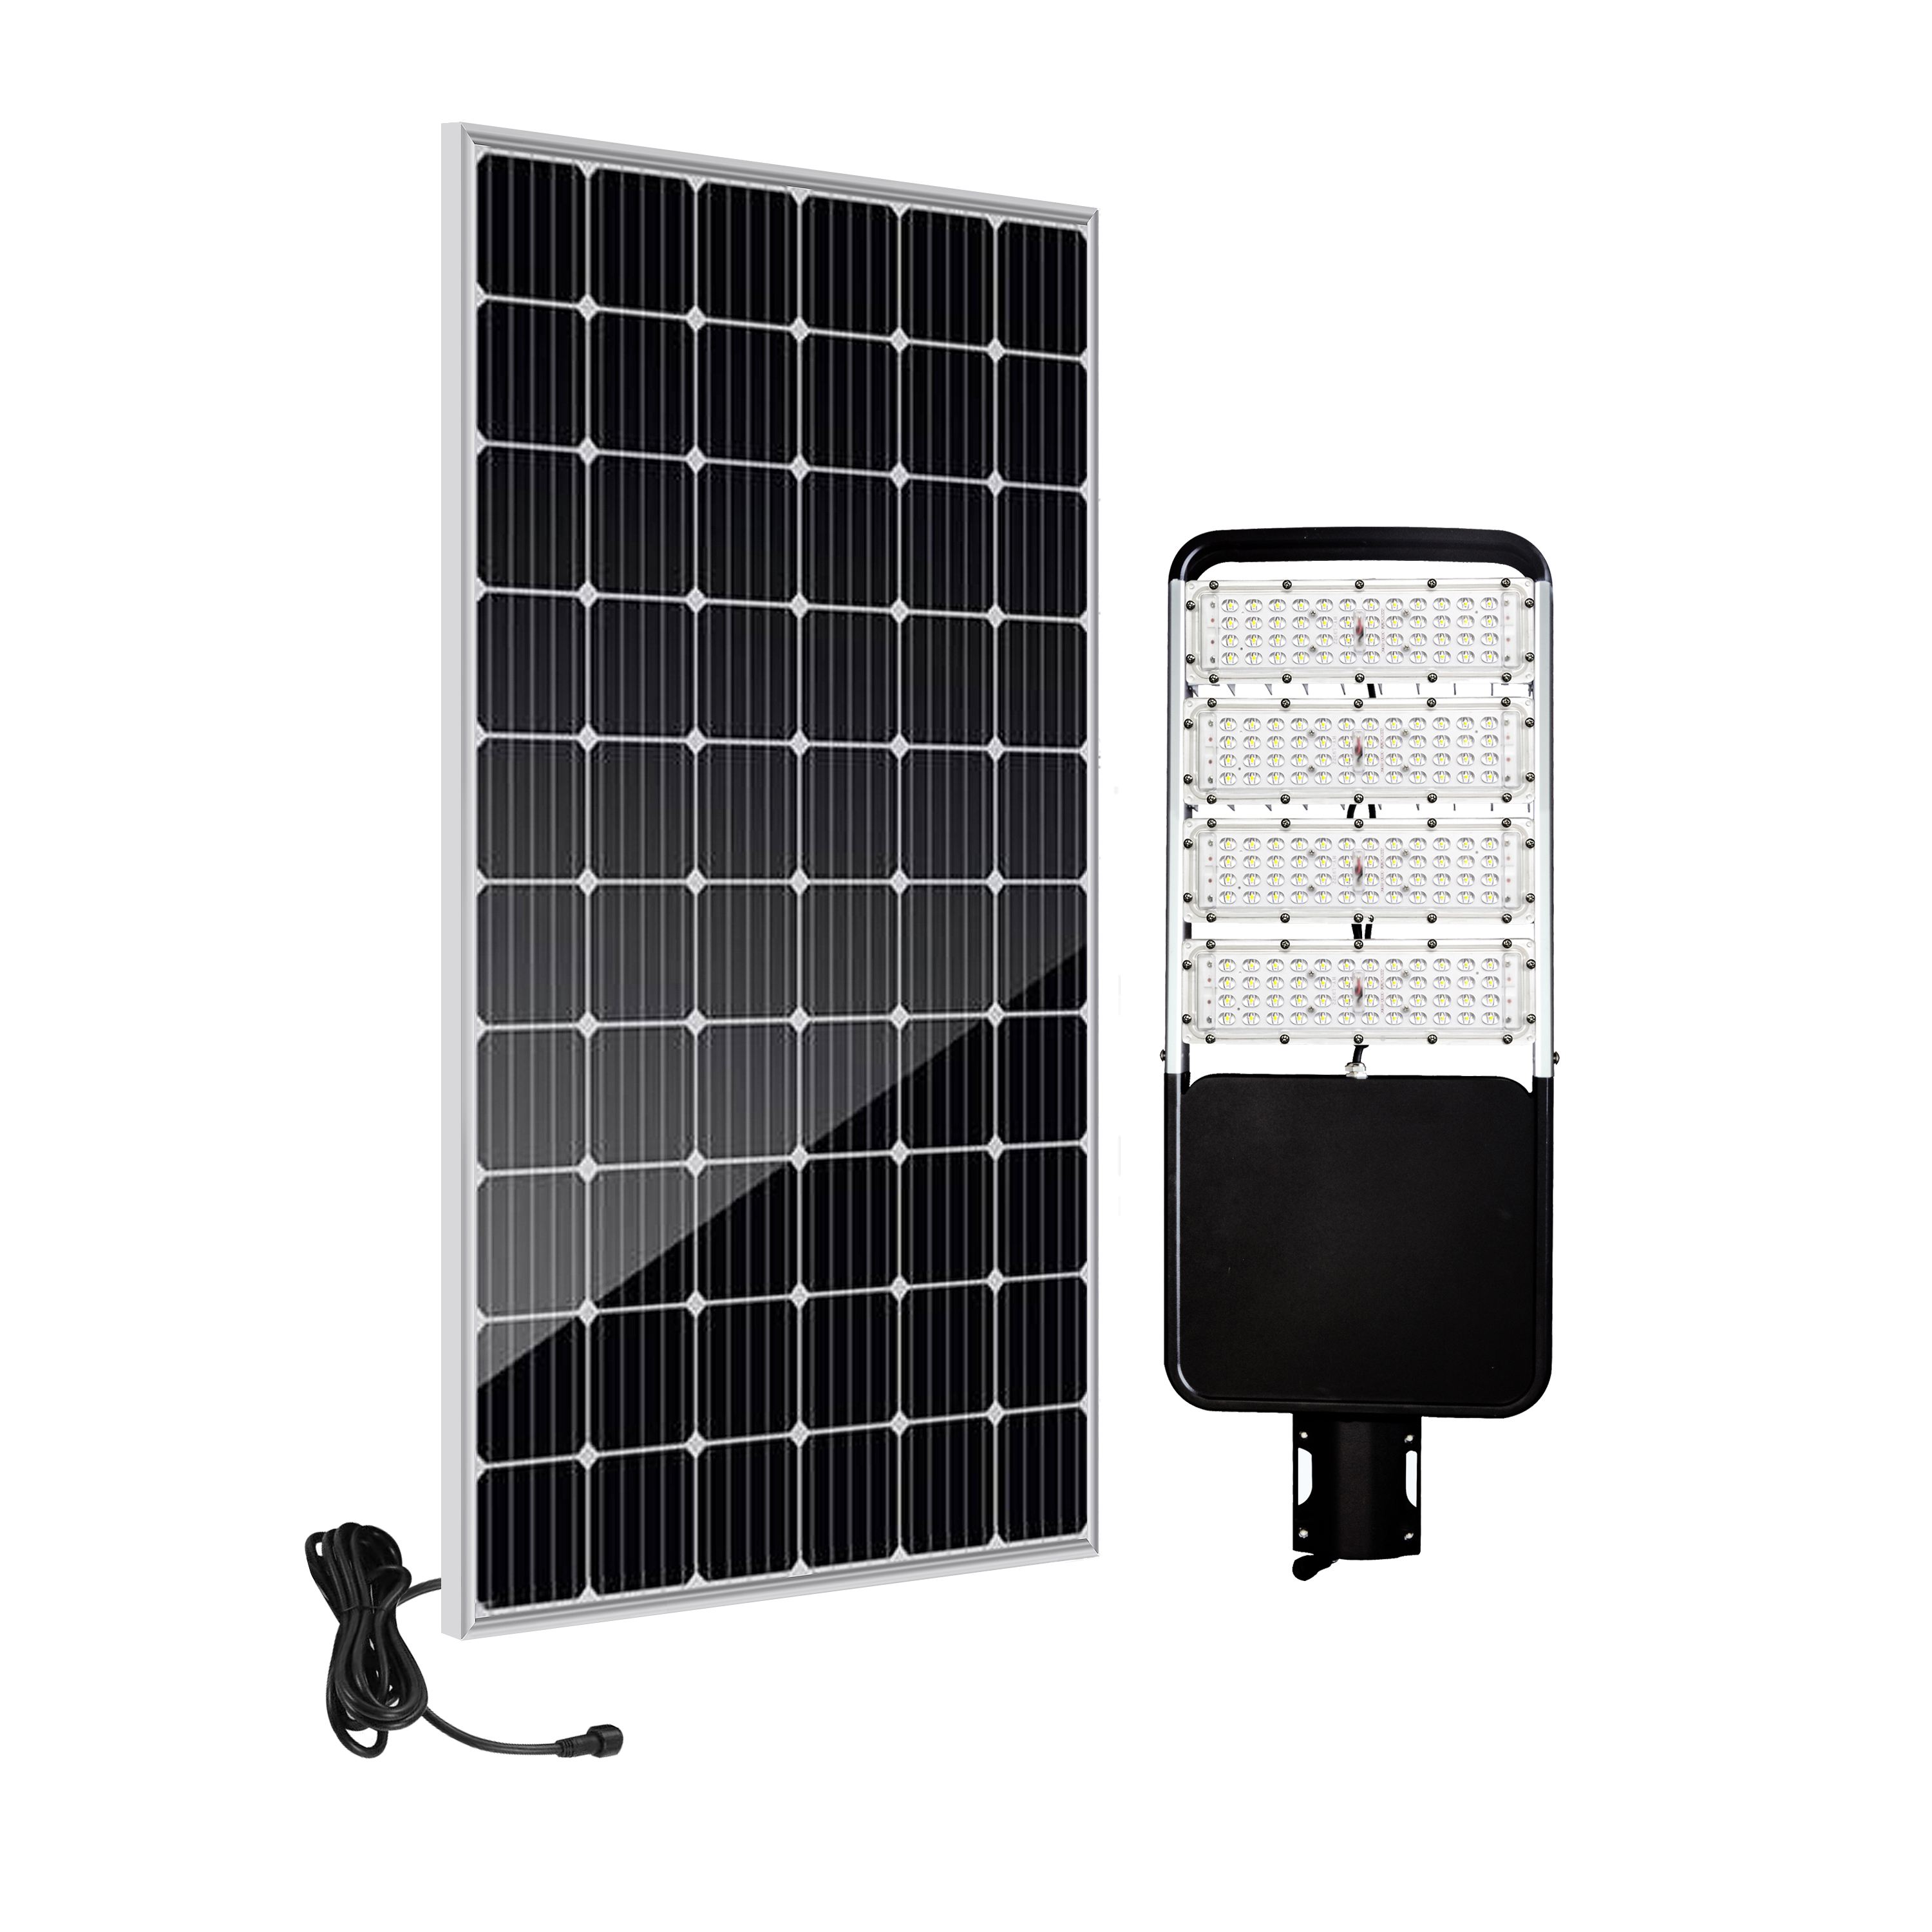 80W New Generation Integrated All in One Solar Street LED Street Light with IEC/TUV/RoHS/CE Certificate with Remote Control